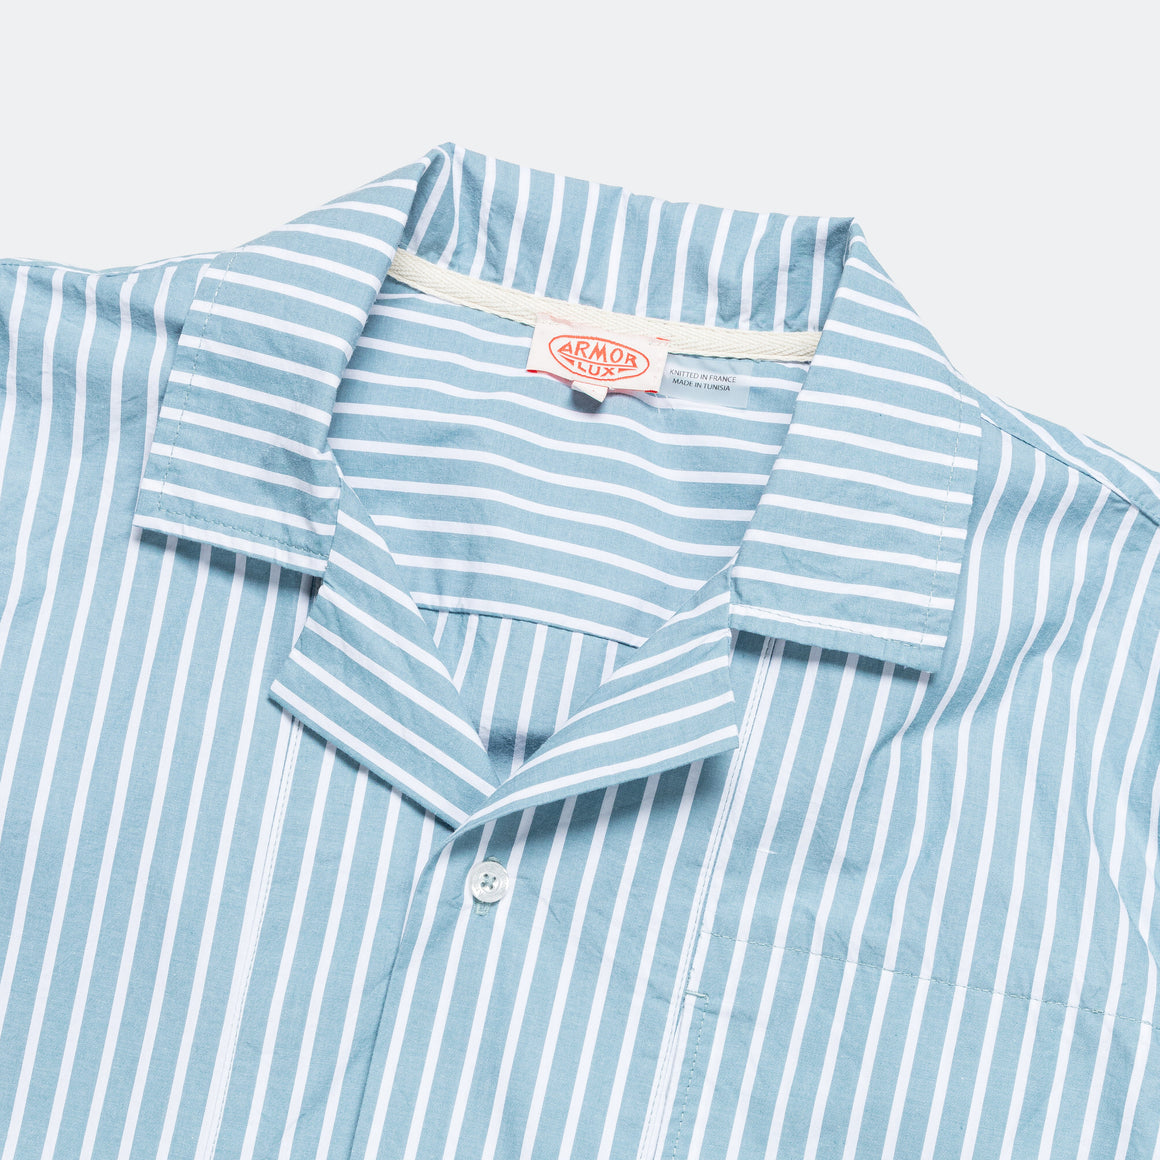 Armor Lux - Striped SS Shirt - Blue Stripe - UP THERE